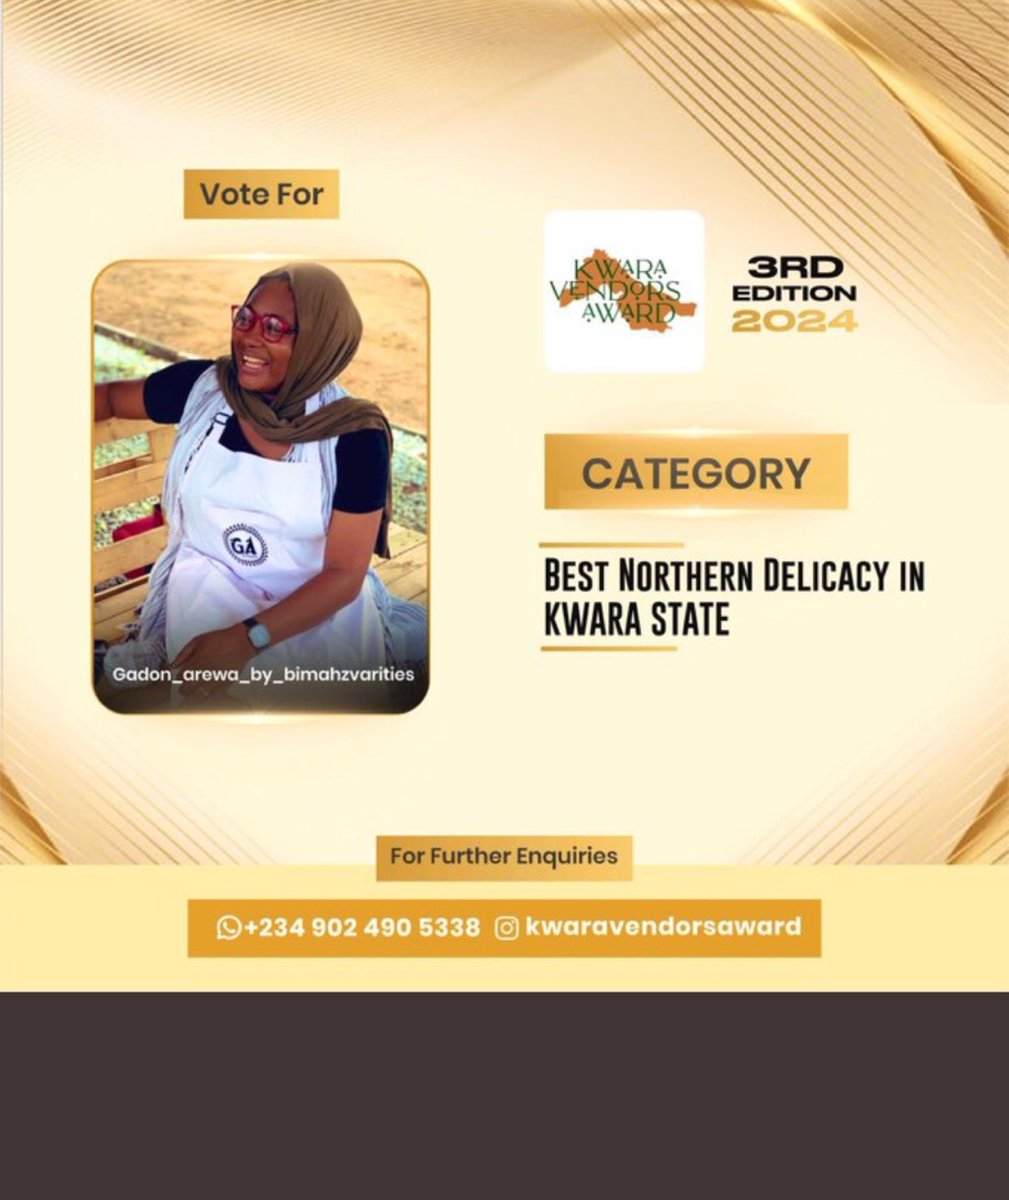 kwaravendorsaward.com.ng Hi my beautiful people Your baby girl has been Nominated again for Best Plug For Northern Delicacies in ilorin Pls Do well to vote Gardonarewa option A(Gardonarewa ) click on it and press vote. You can vote every 30minutes. God bless you.